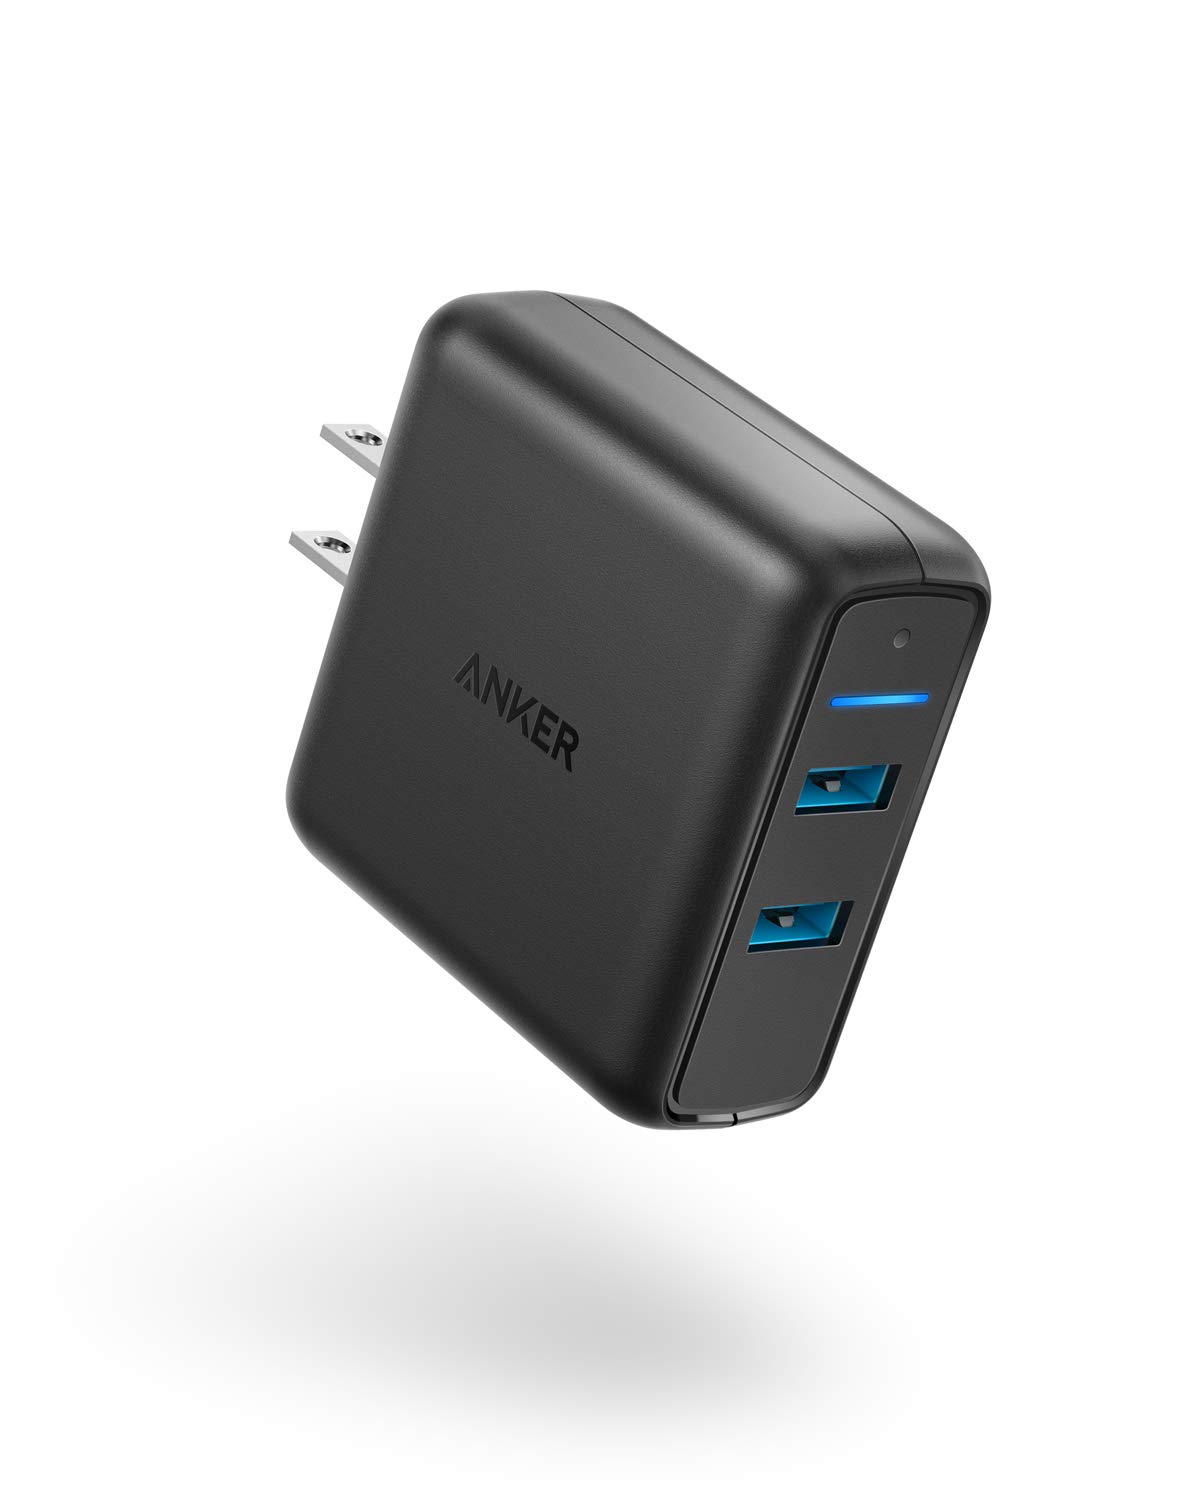 Anker Quick Charge 3.0 39W Dual USB Wall Char…